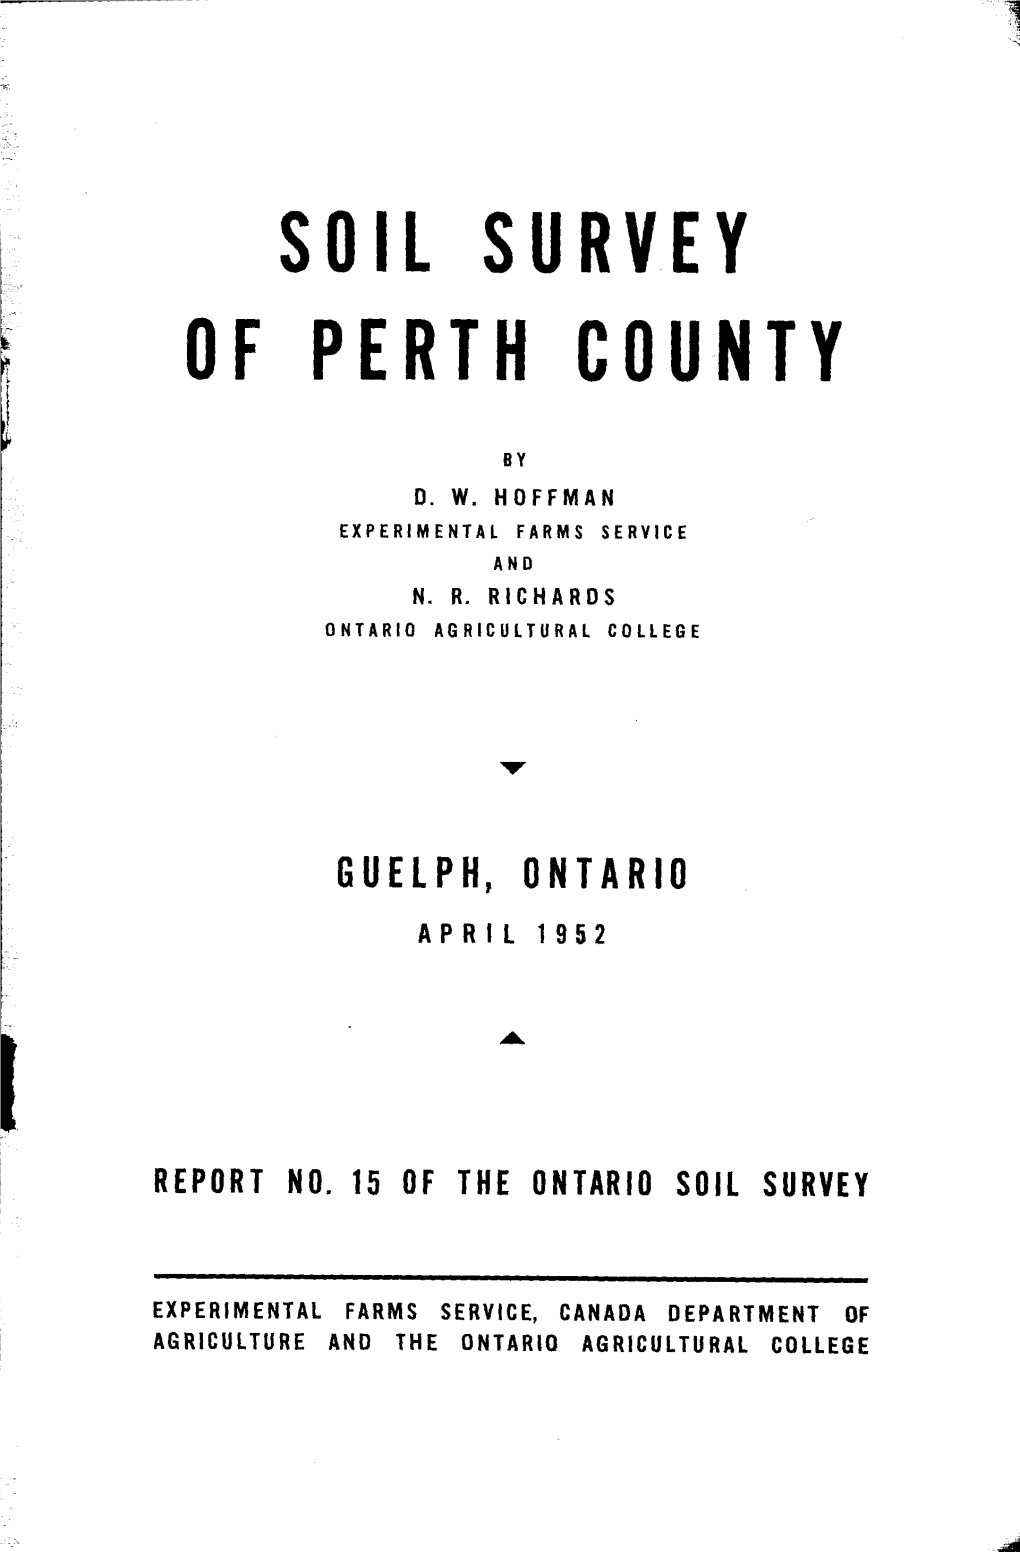 Soil Survey of Perth County by D